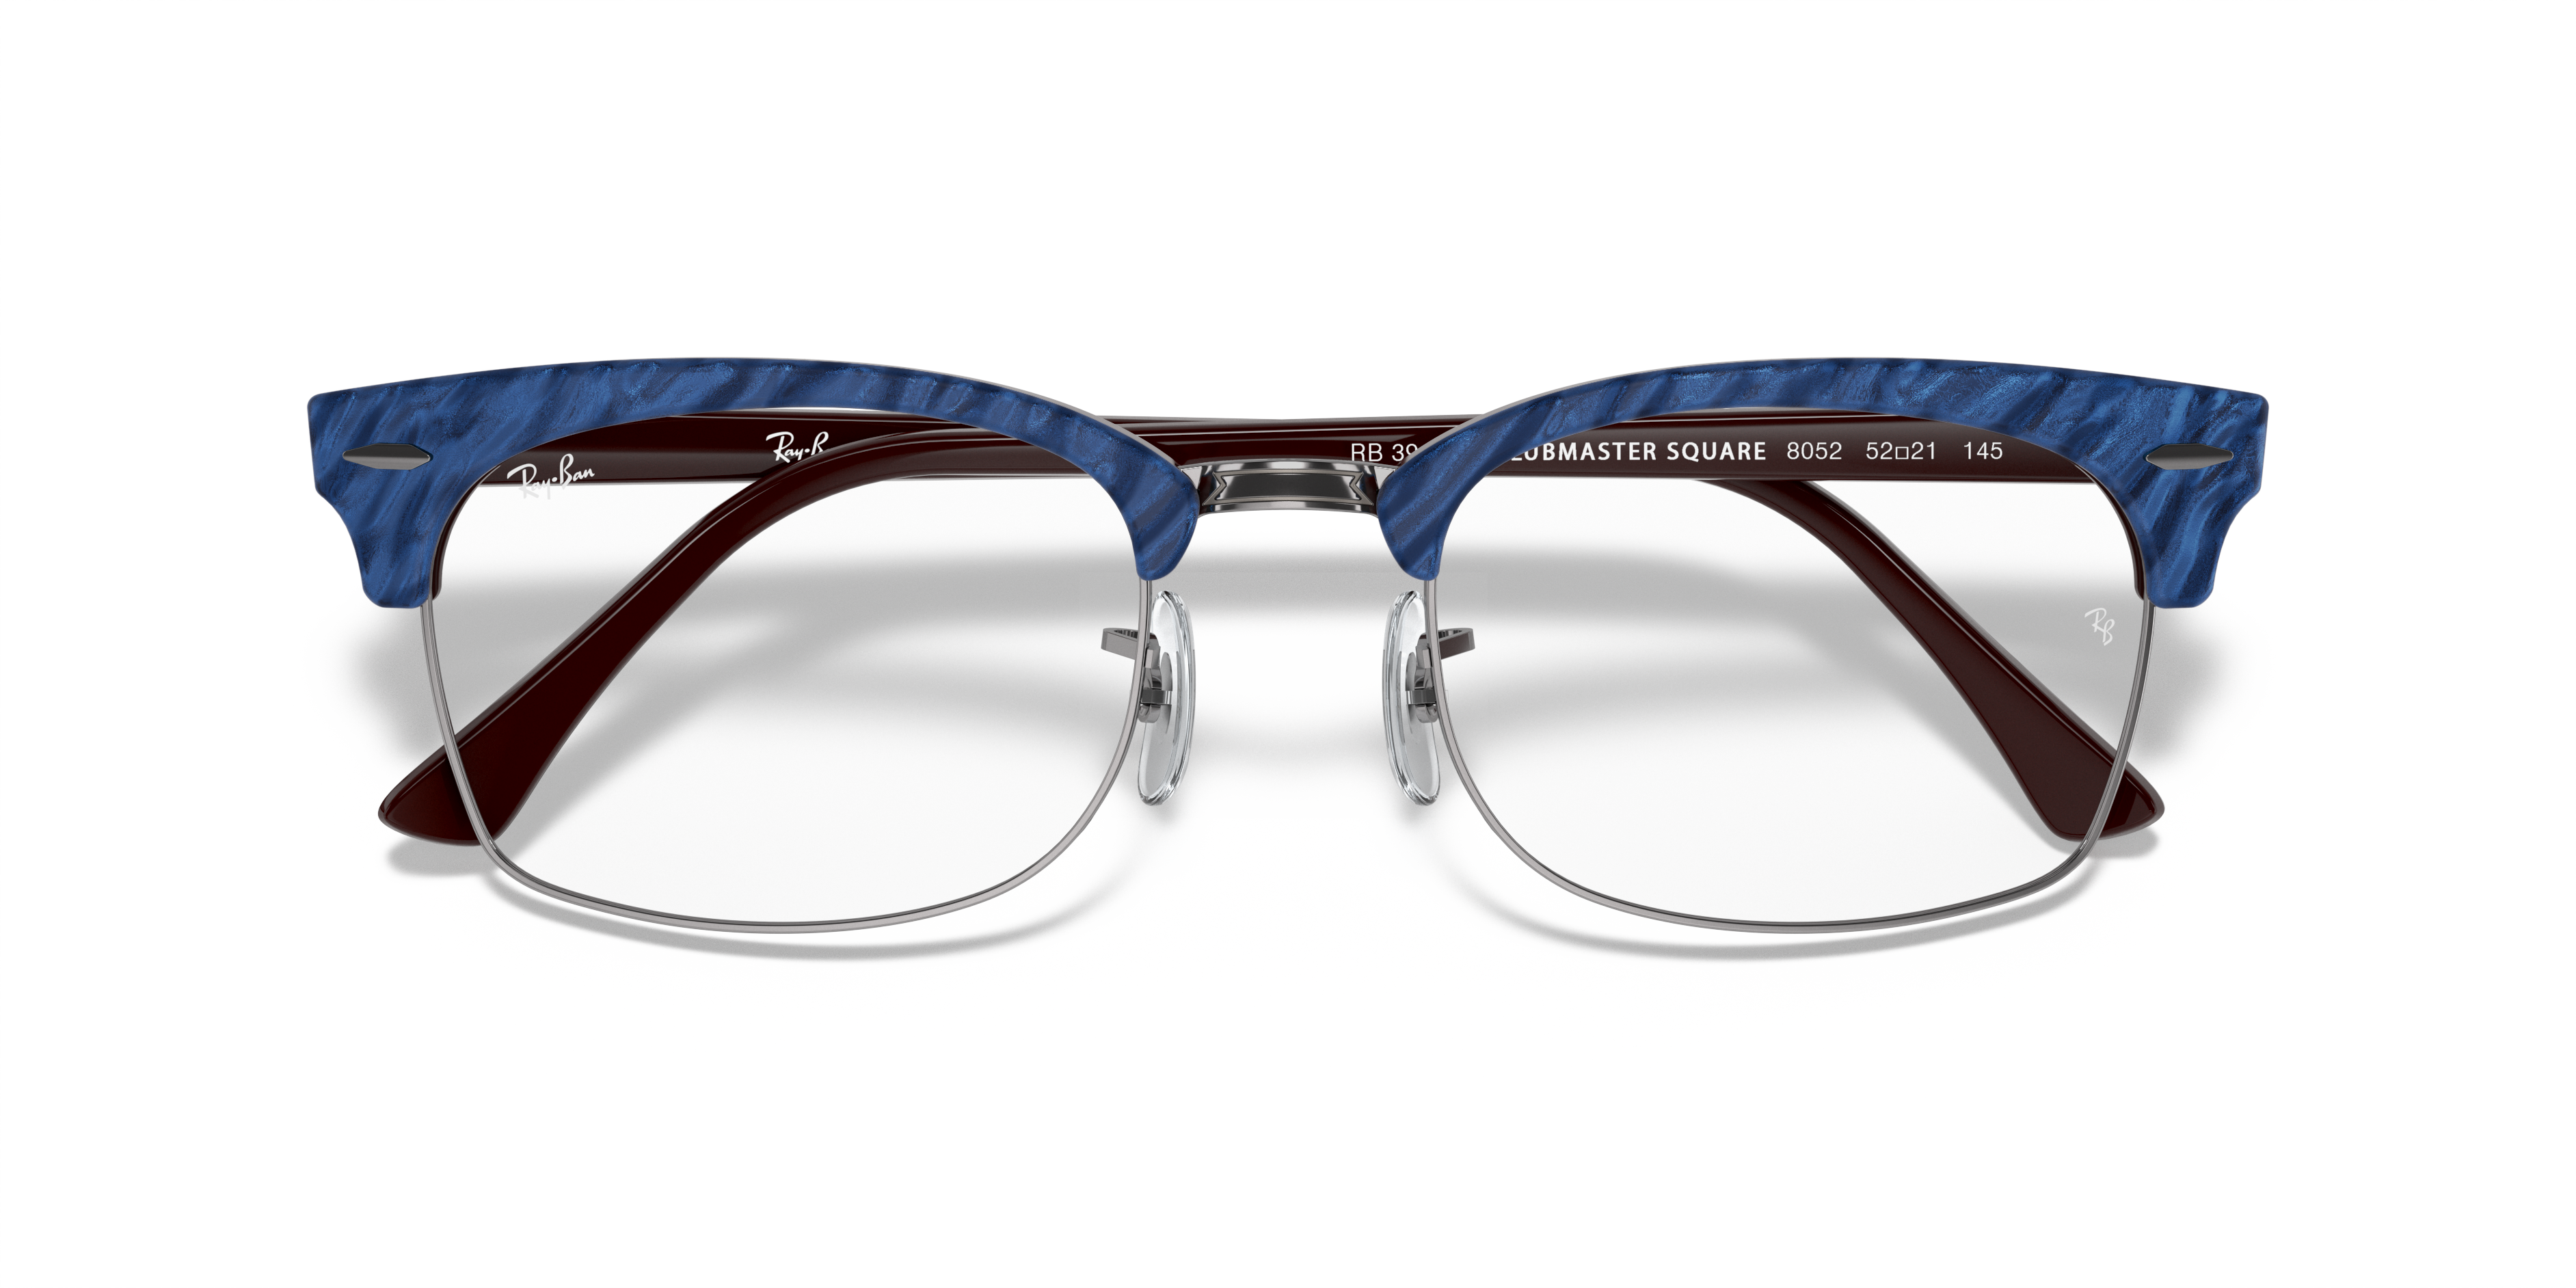 Clubmaster Square Optics Eyeglasses with Wrinkled Blue Frame | Ray 